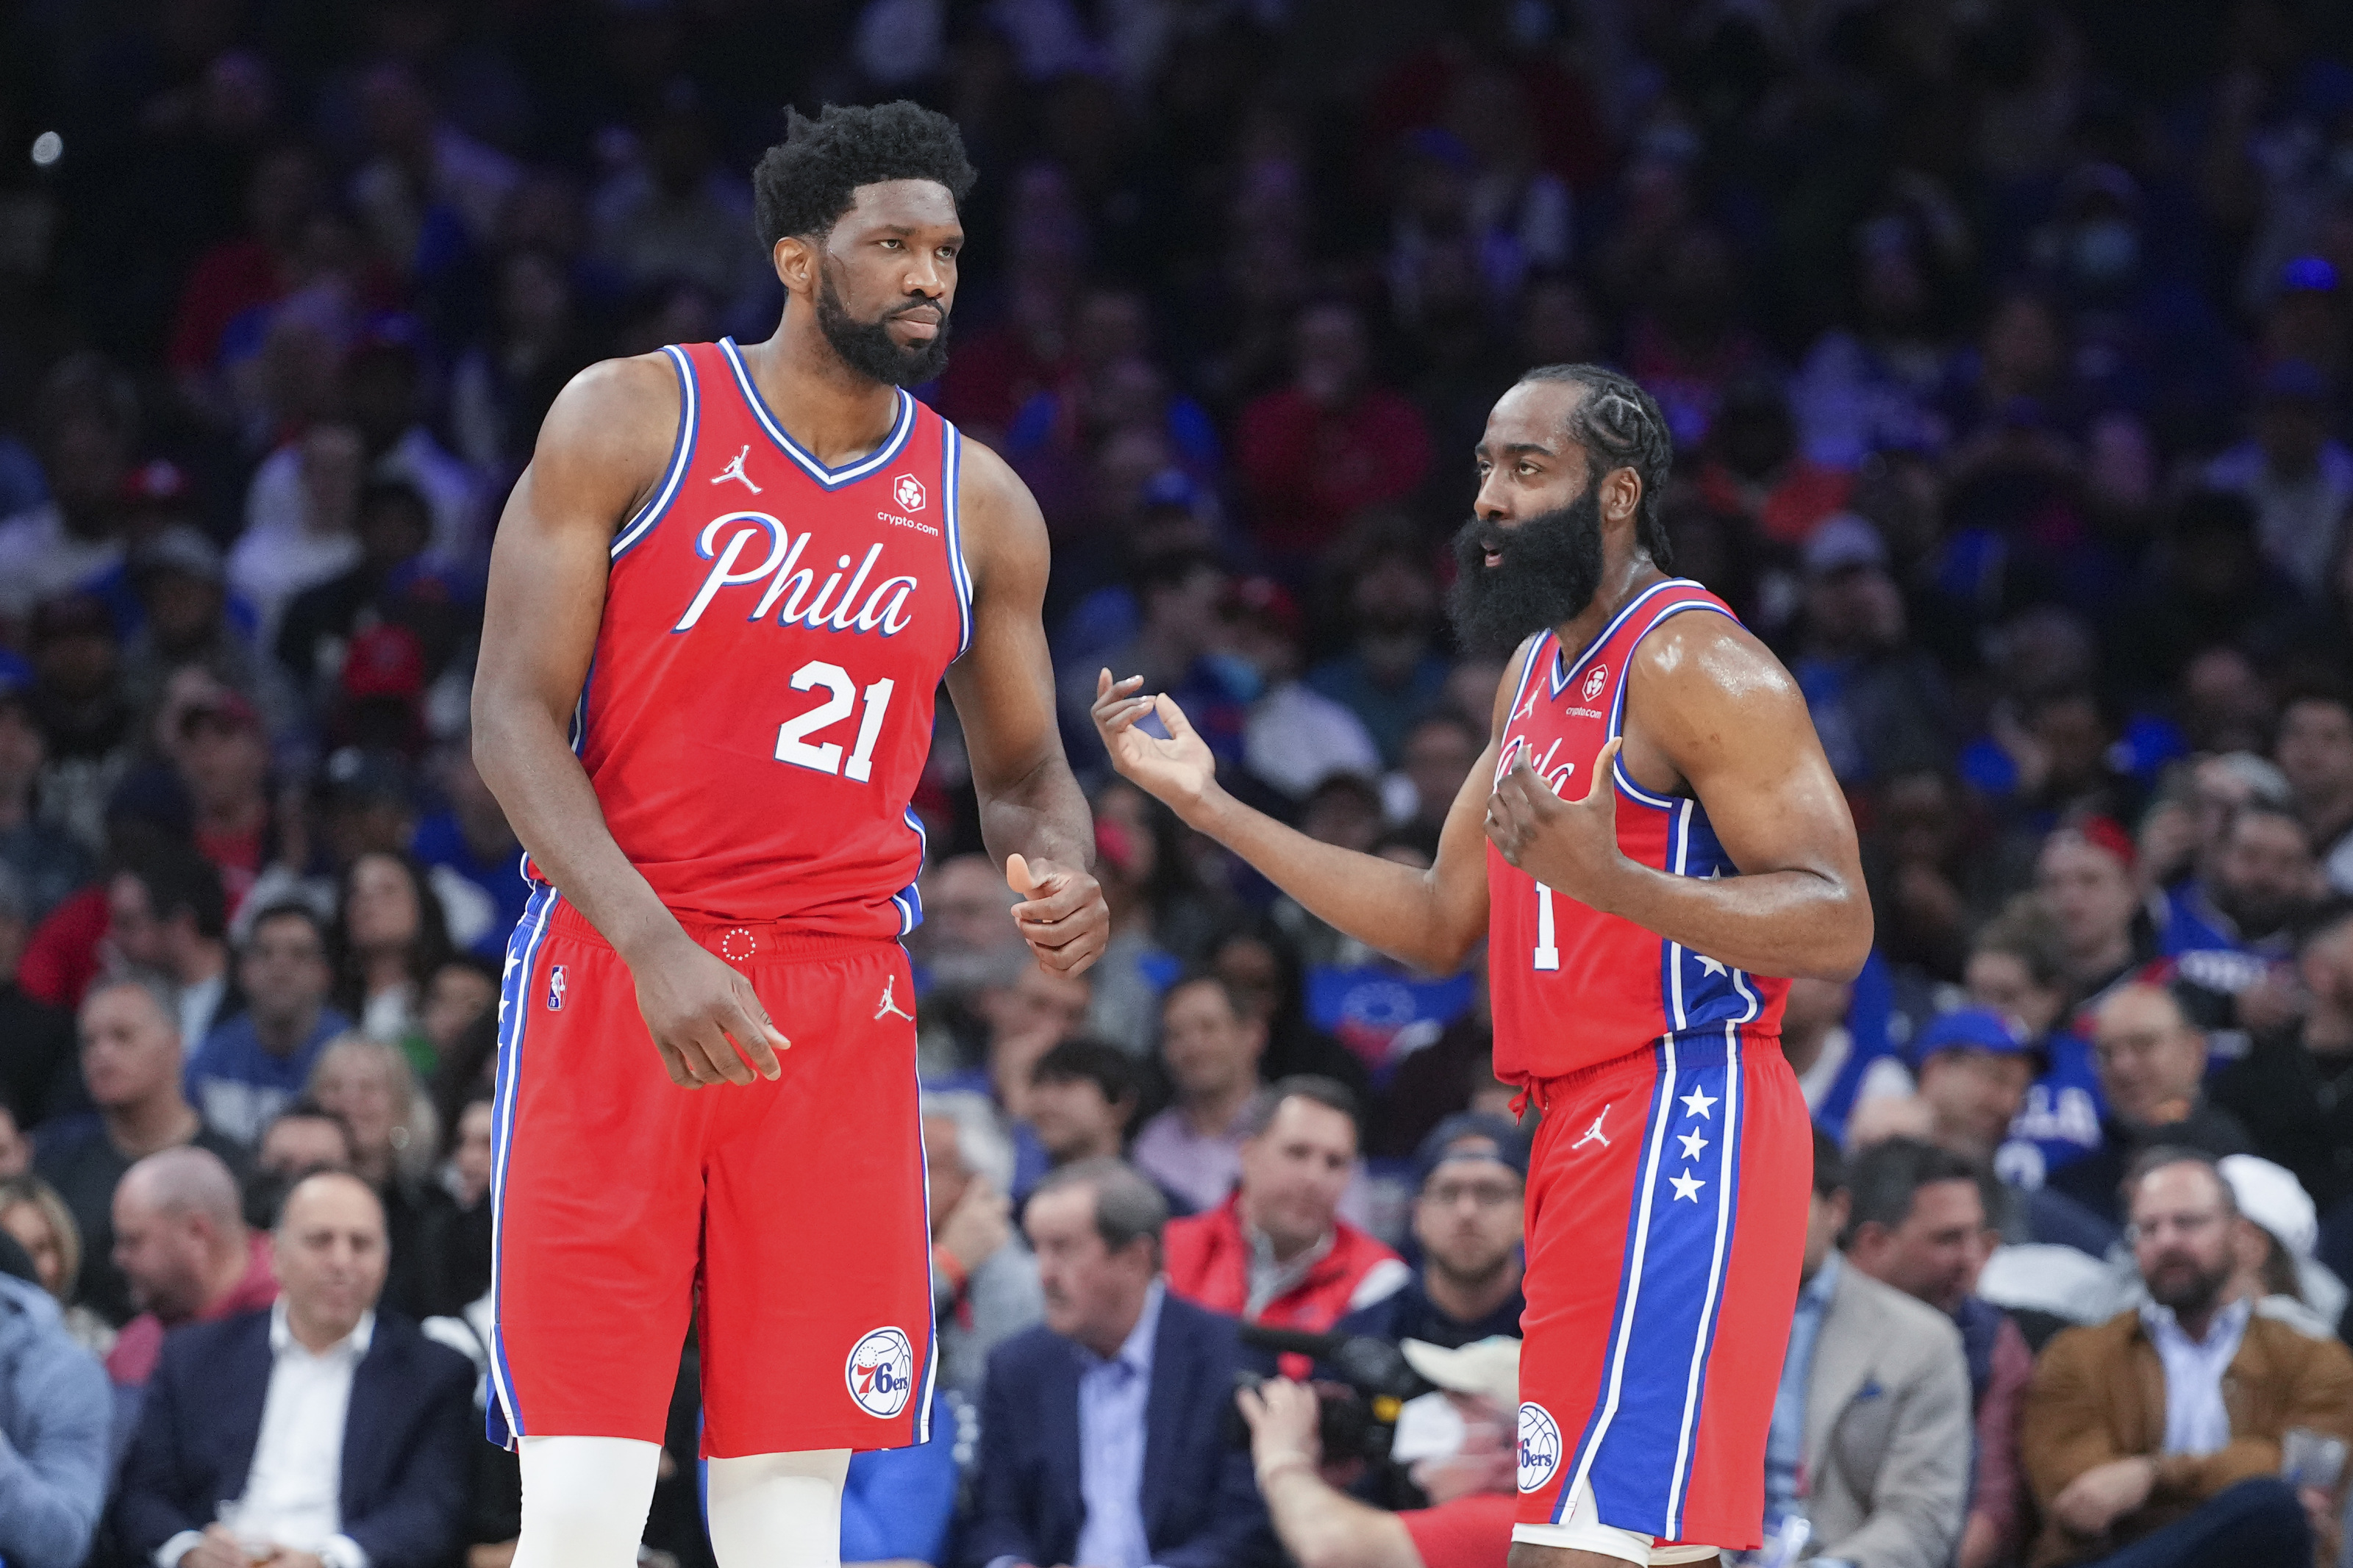 Joel Embiid & James Harden with 64 POINTS on Christmas Day 🎄 